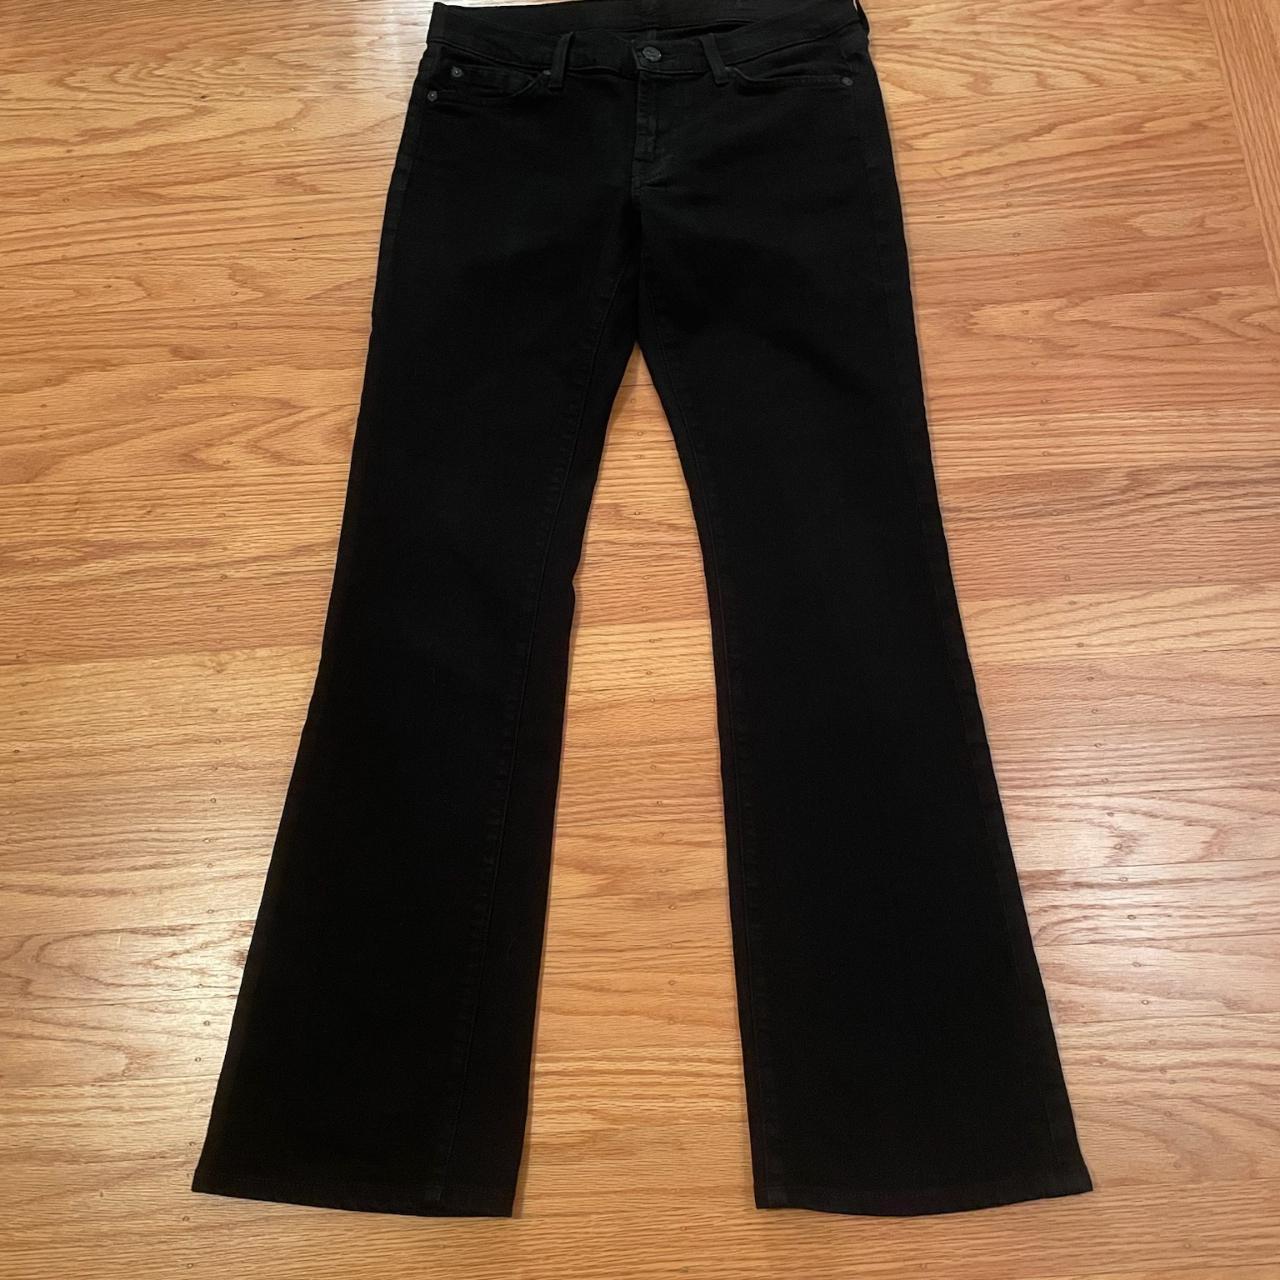 7 for All Mankind black jeans with black... - Depop